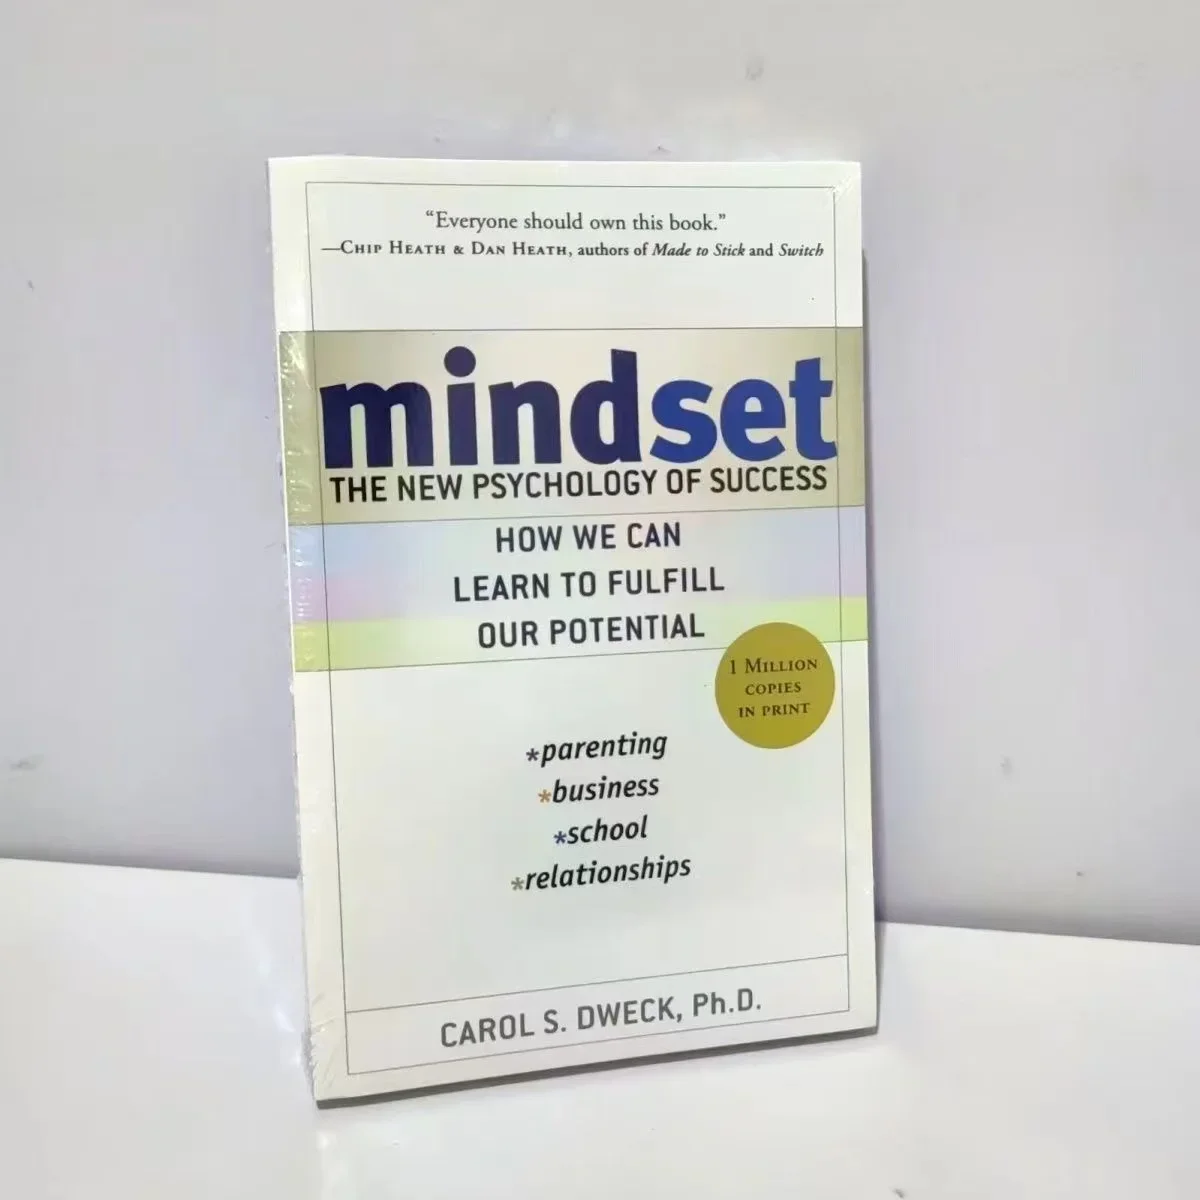 

Mindset The New Psychology Of Success English Book by Carol S. Dweck Foreign Literature Inspirational Book